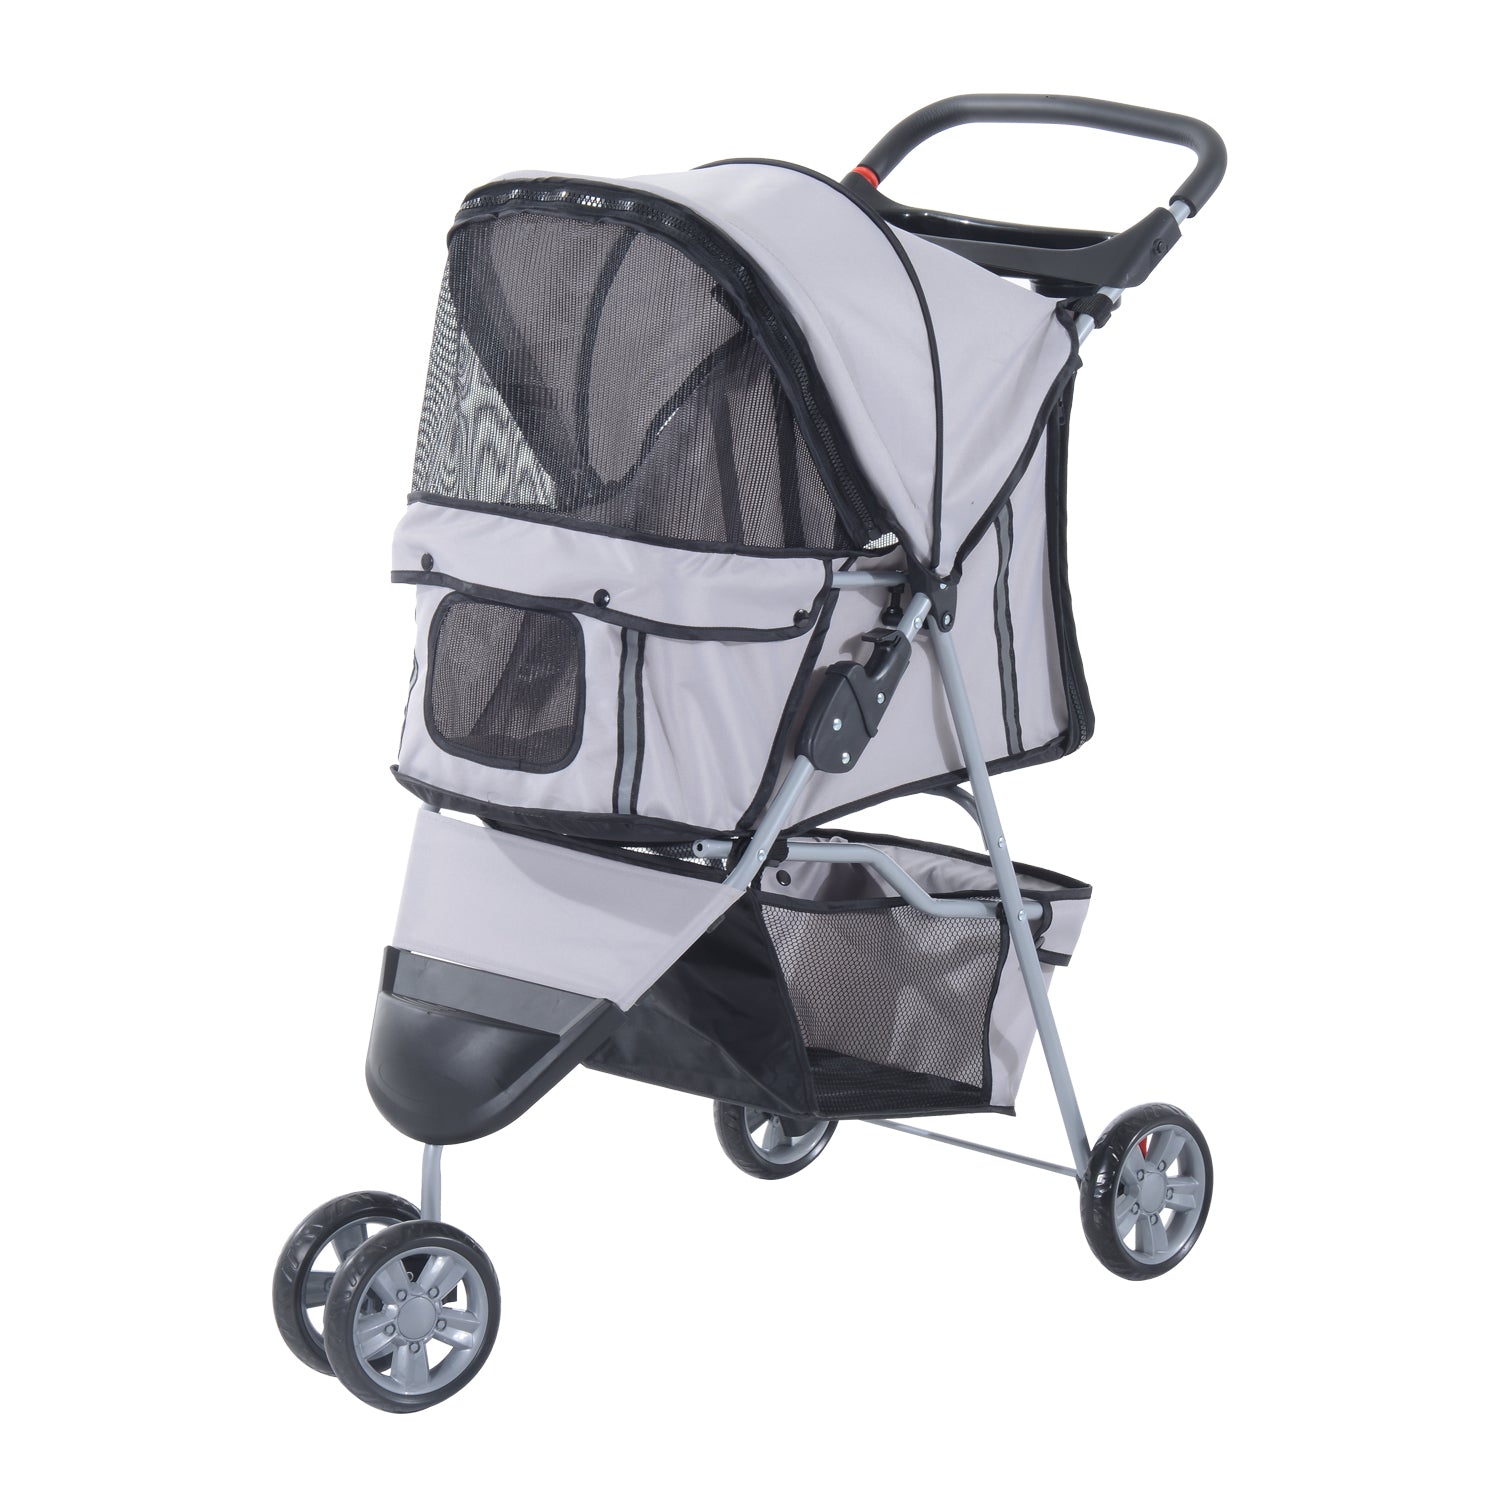 Dogs Oxford Cloth Three Wheel Pram Grey - Suitable for Small Pets